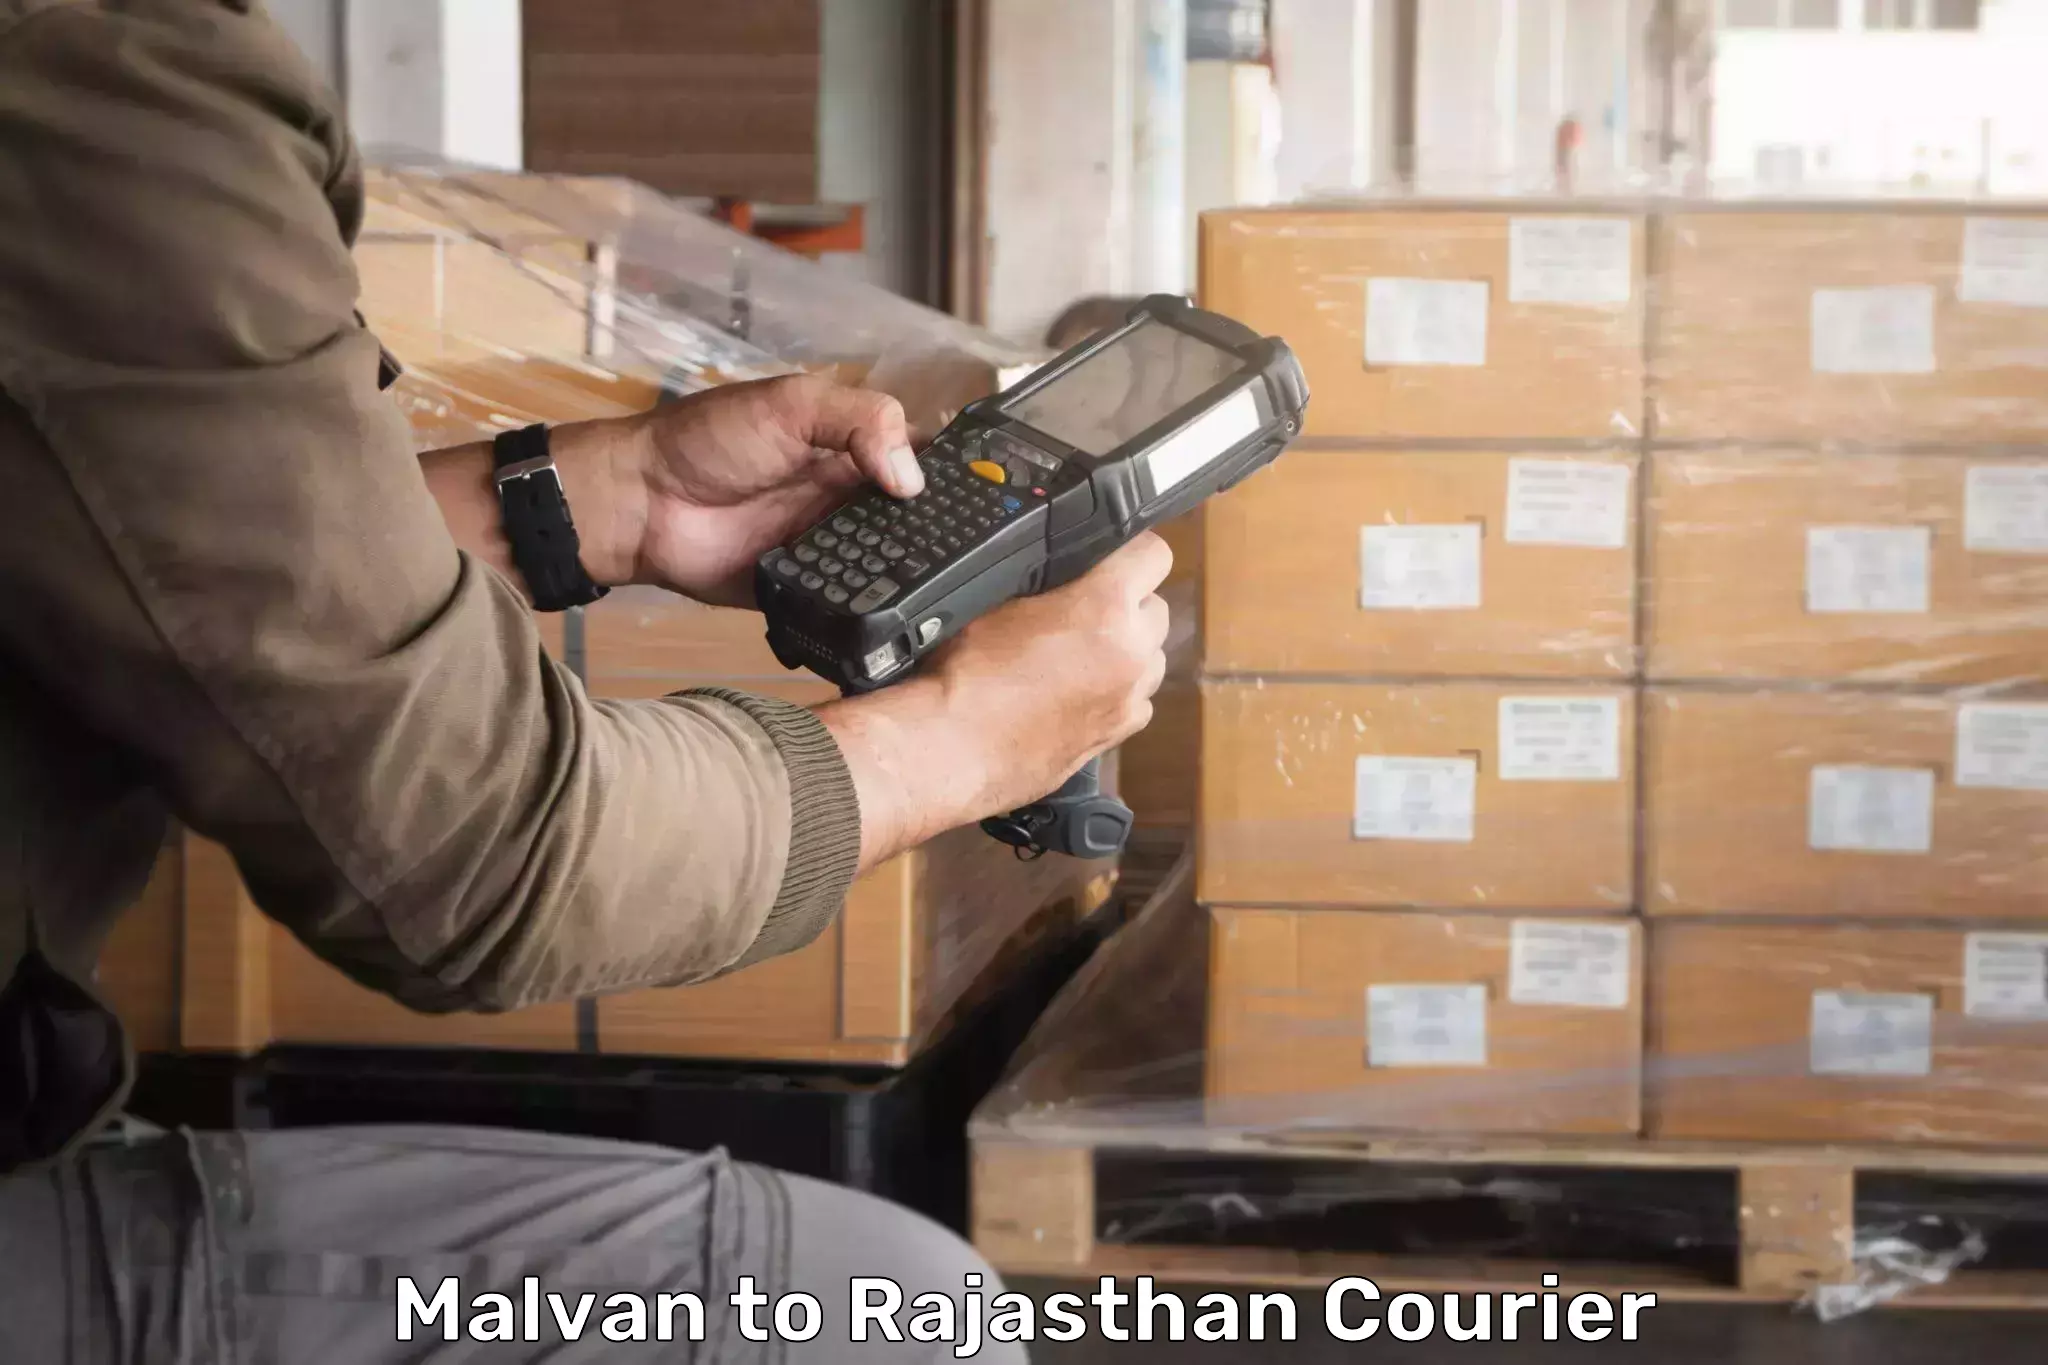 State-of-the-art courier technology Malvan to Sanchore